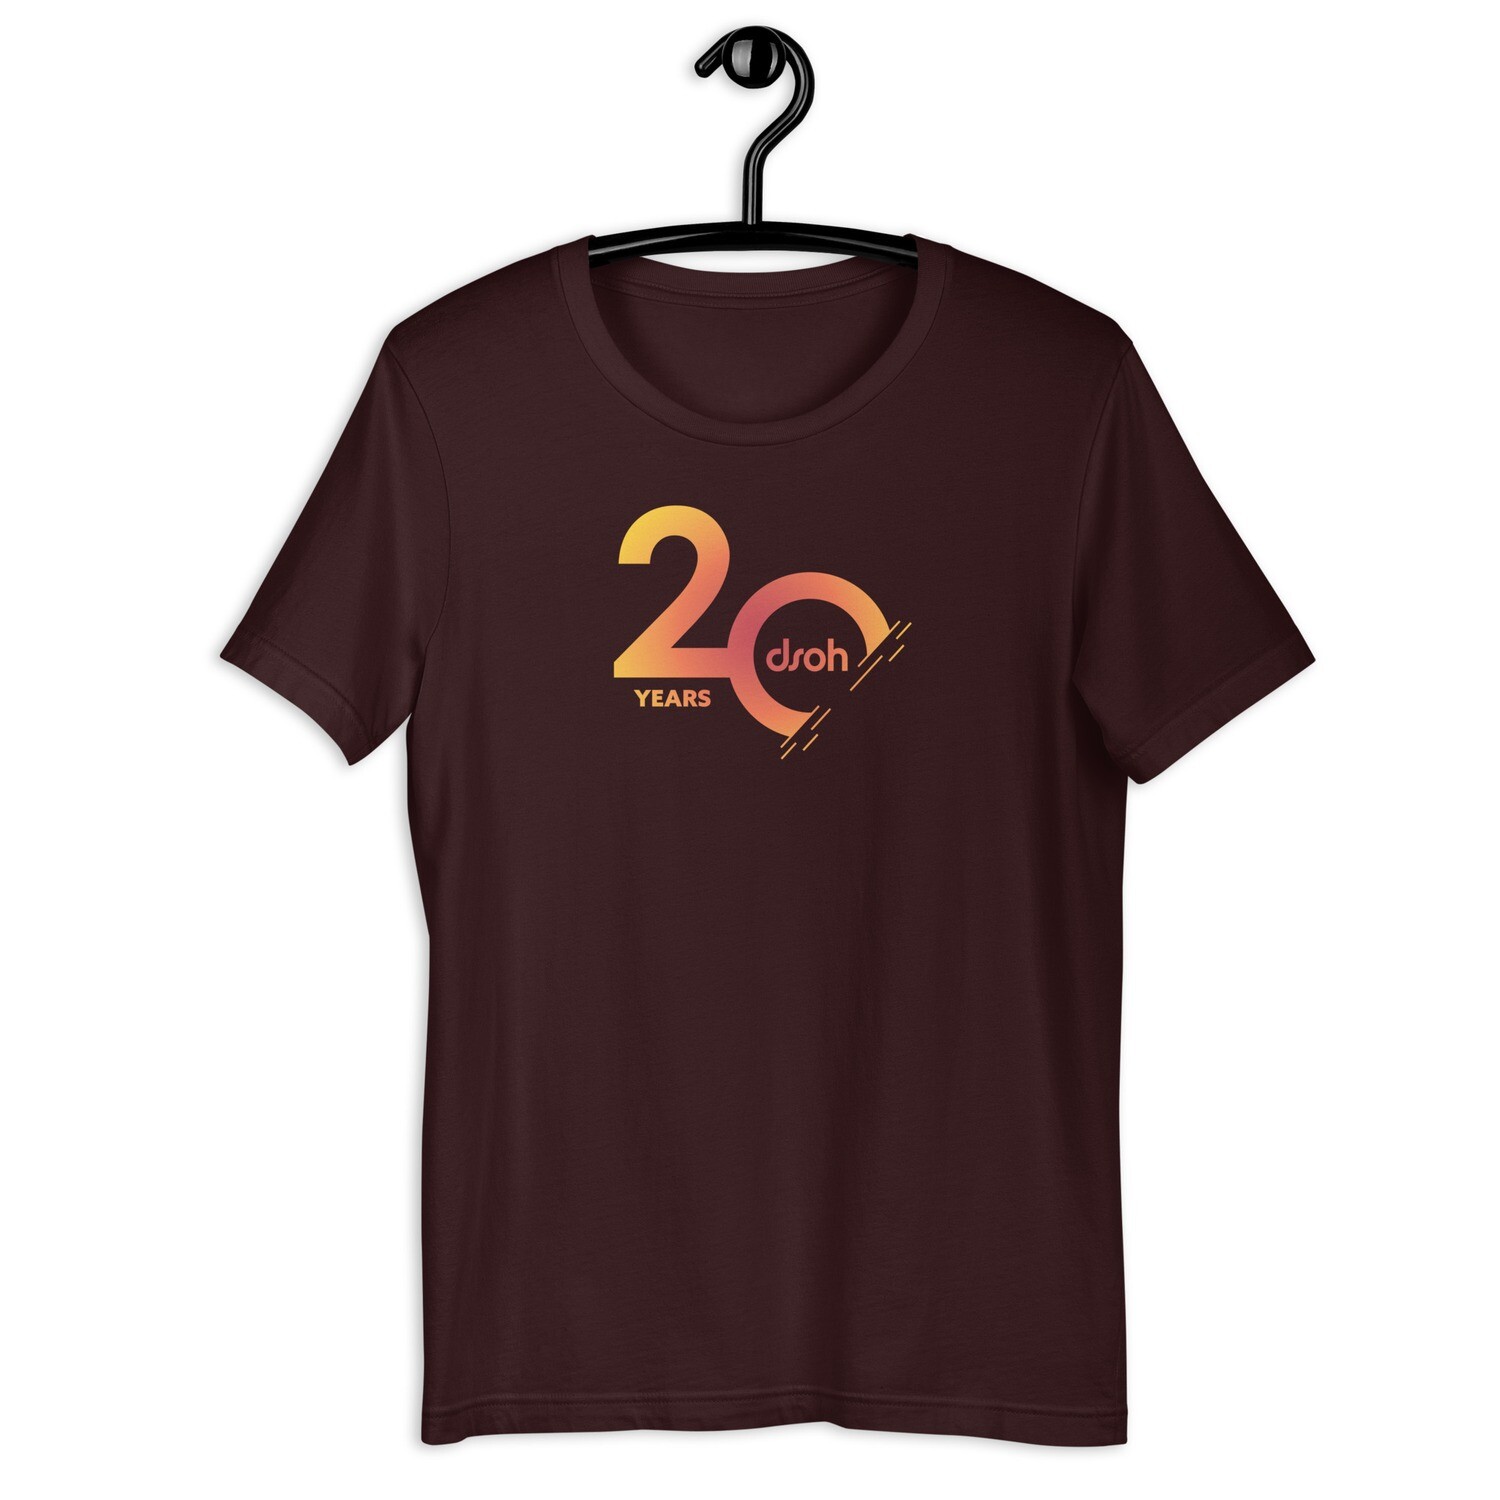 NEW DROP - 20 YEARS DSOH Unisex T-Shirt